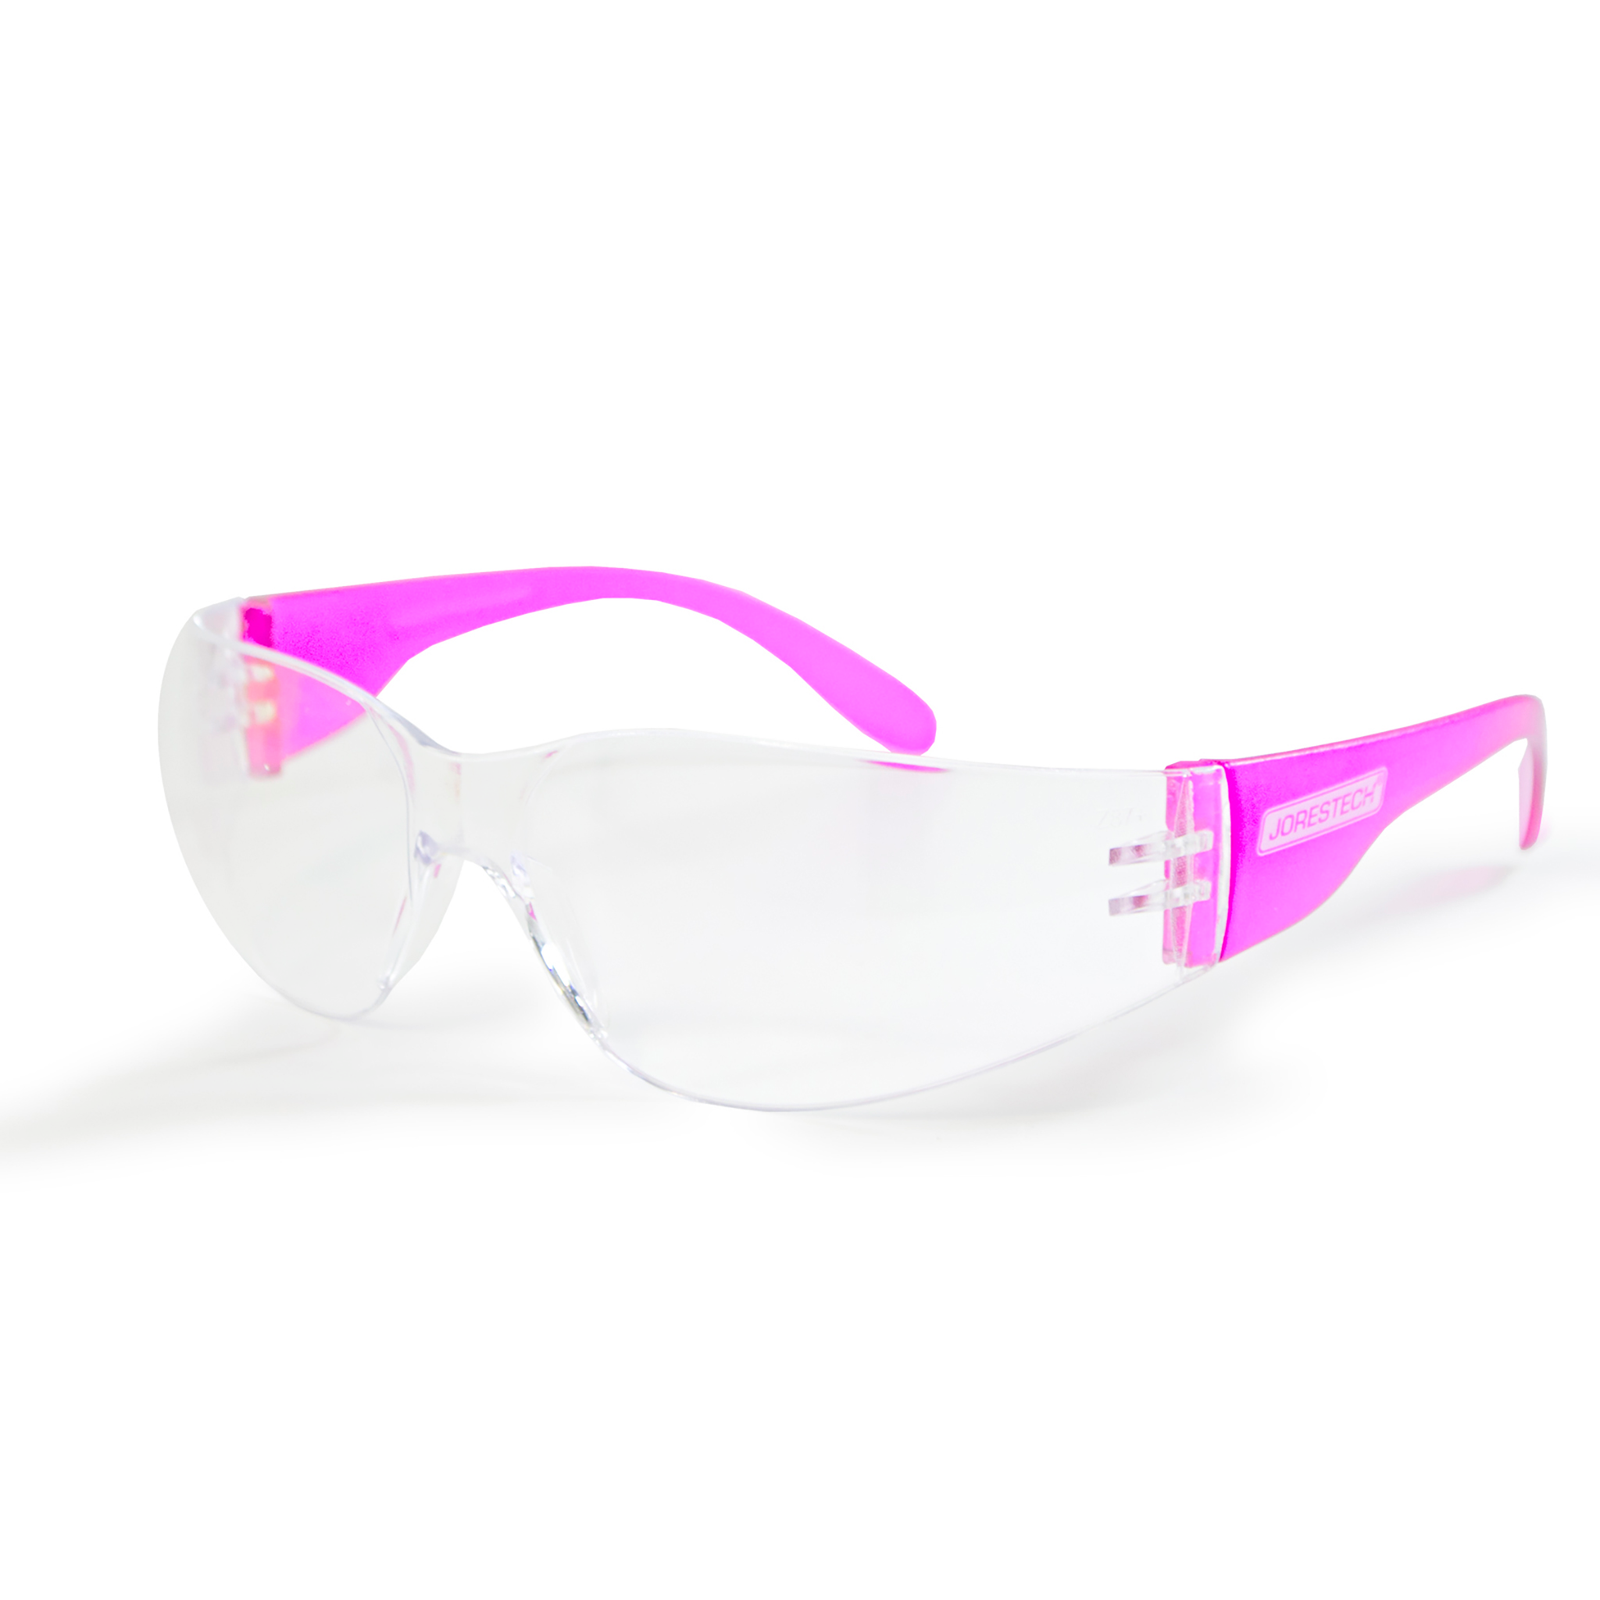 Features one JORESTECH high impact glass with clear lenses and pink temples over white background